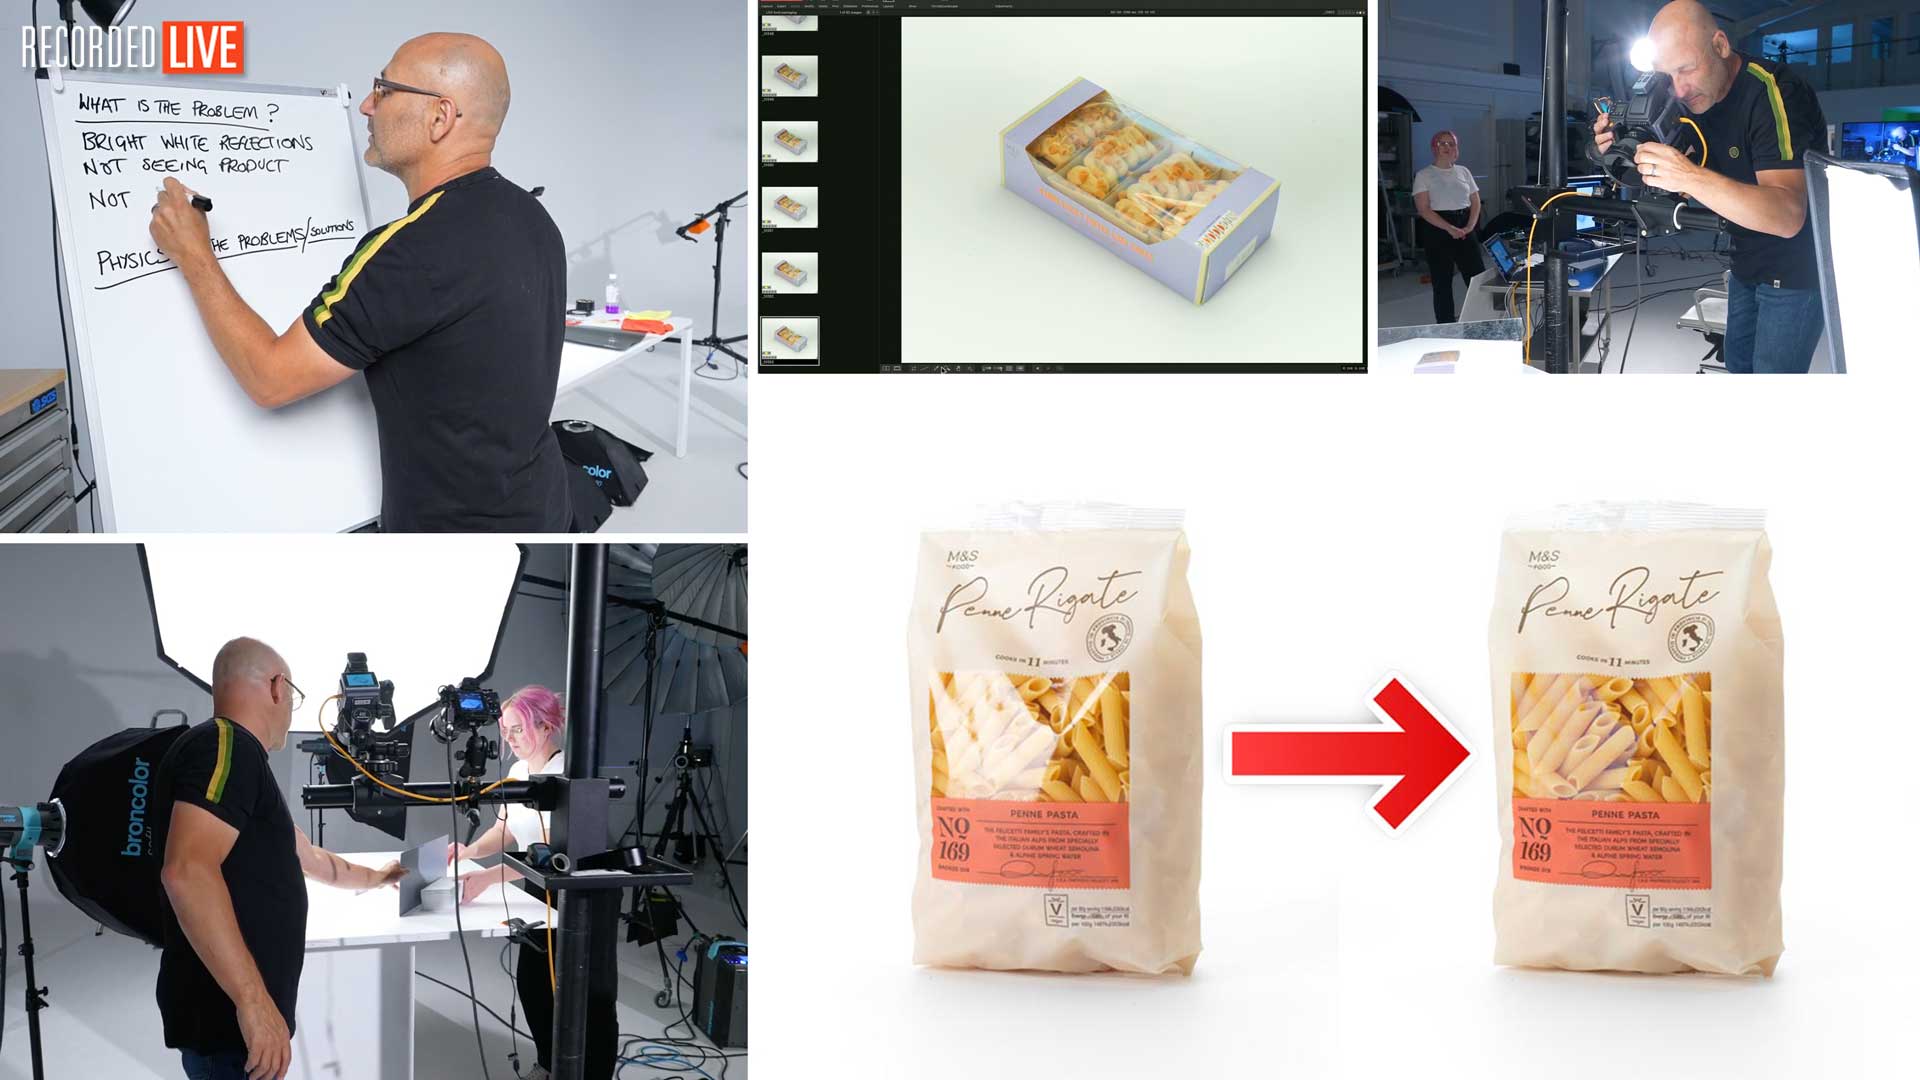 Photographing Wrapped and Packaged Food